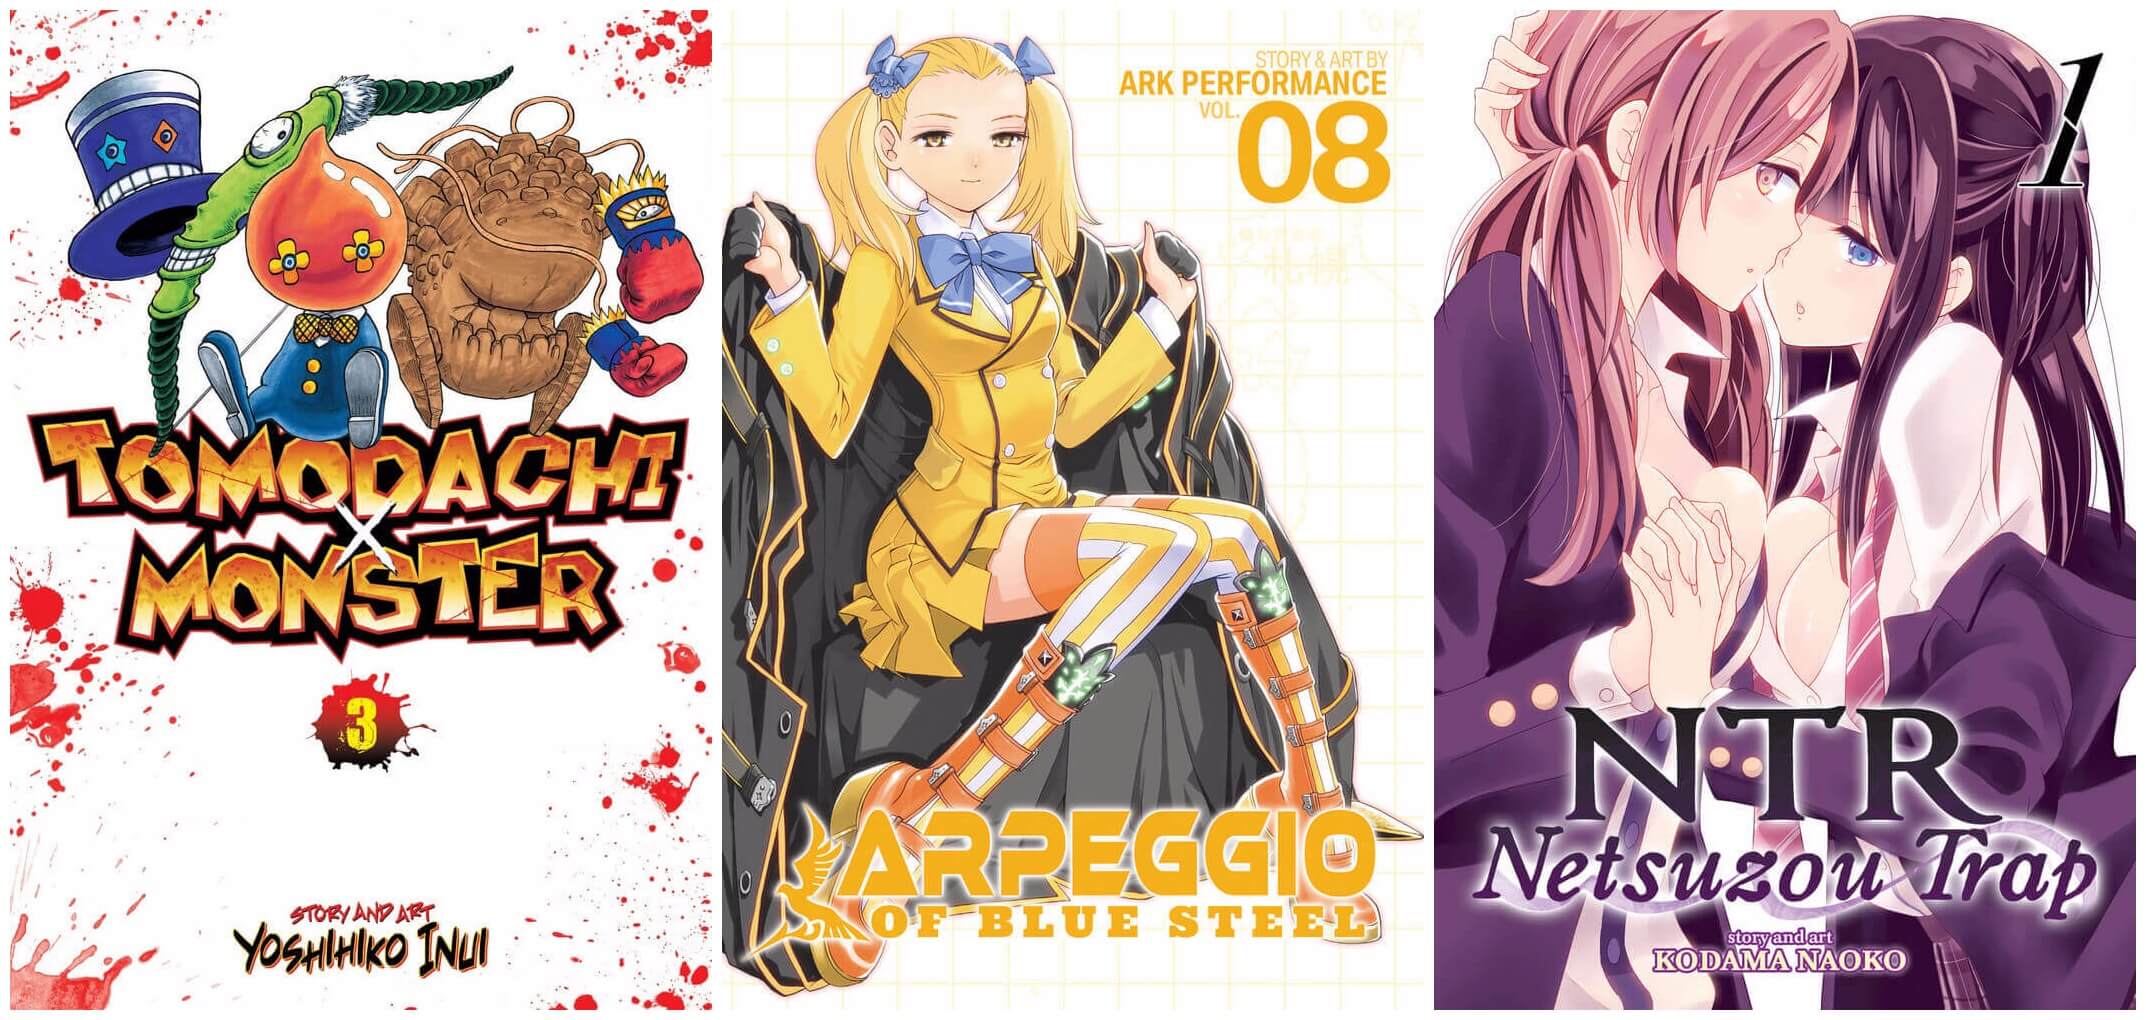 September 2016 Manga Releases Covers for Tomodachi x Monster, Arpeggion of Blue Steel, and Netsuzou Trap.